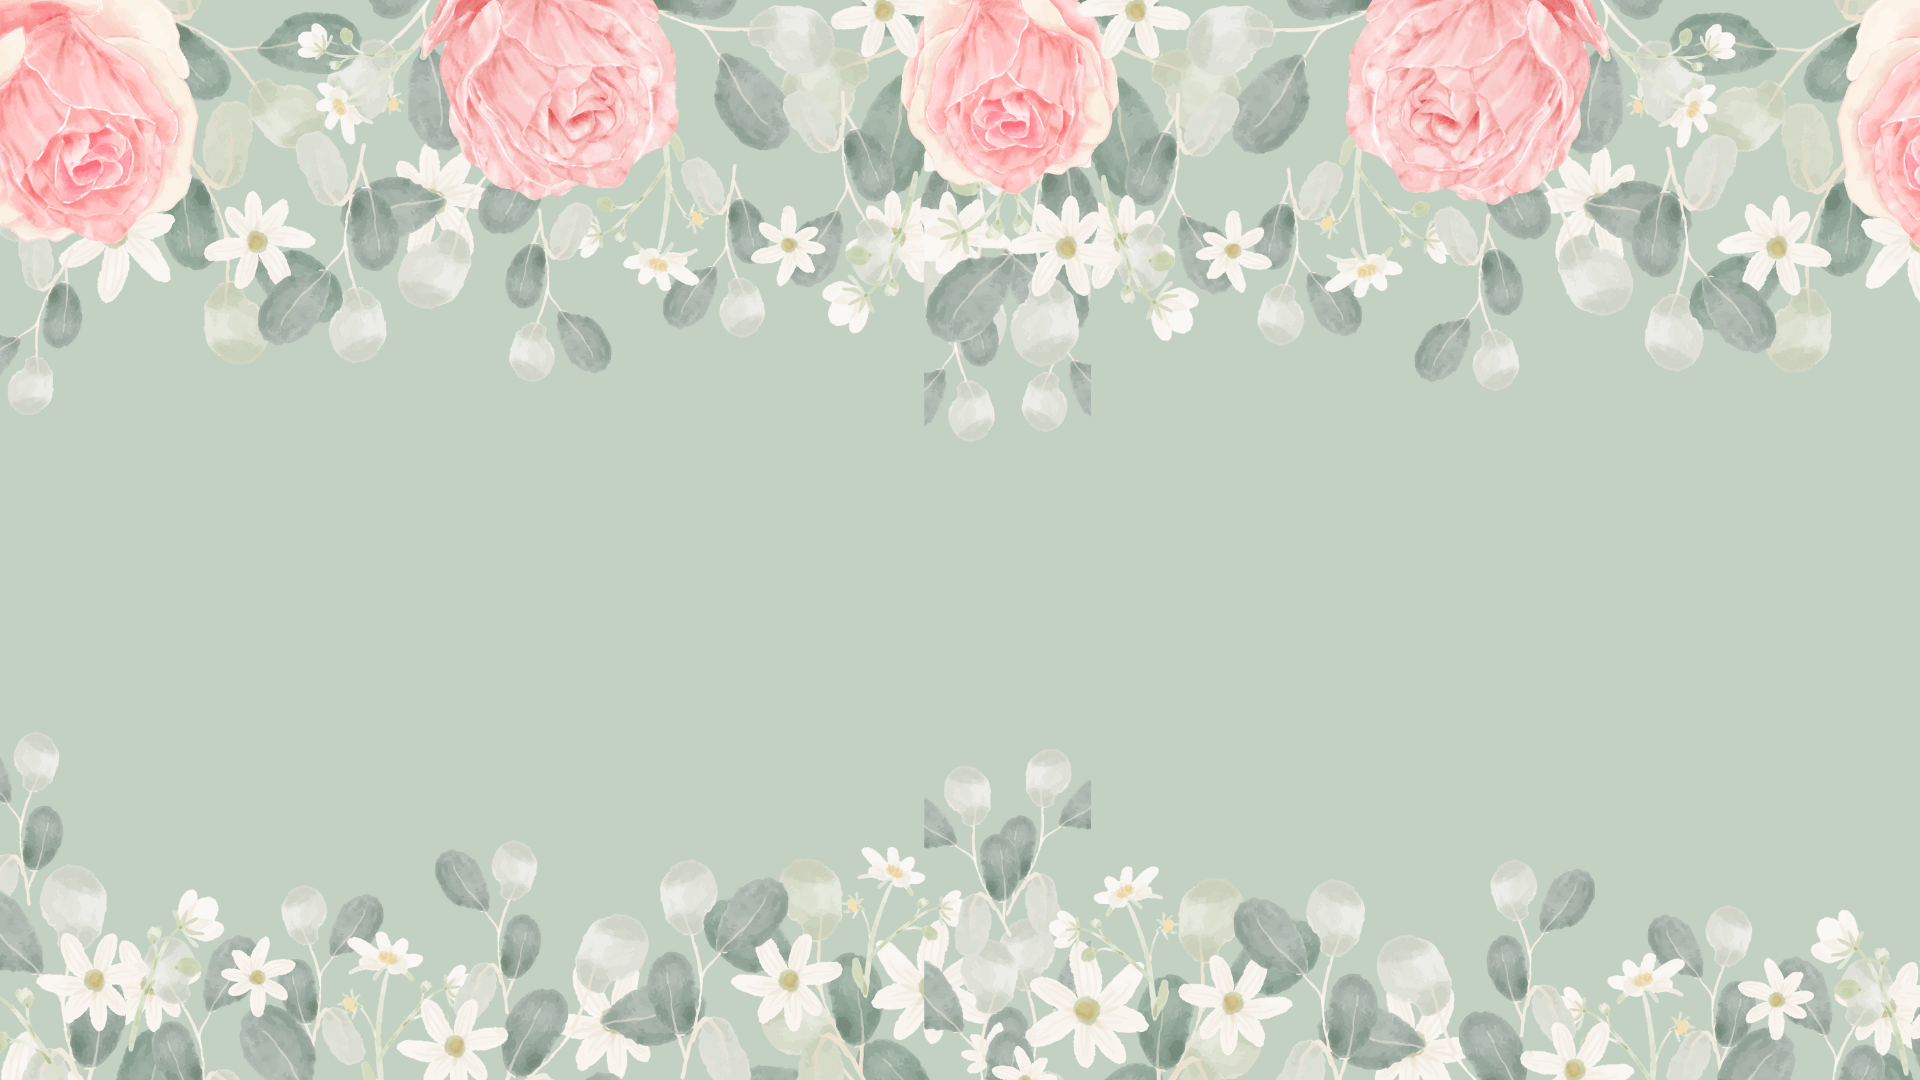 A green background with white flowers and pink roses at the top - Green, sage green